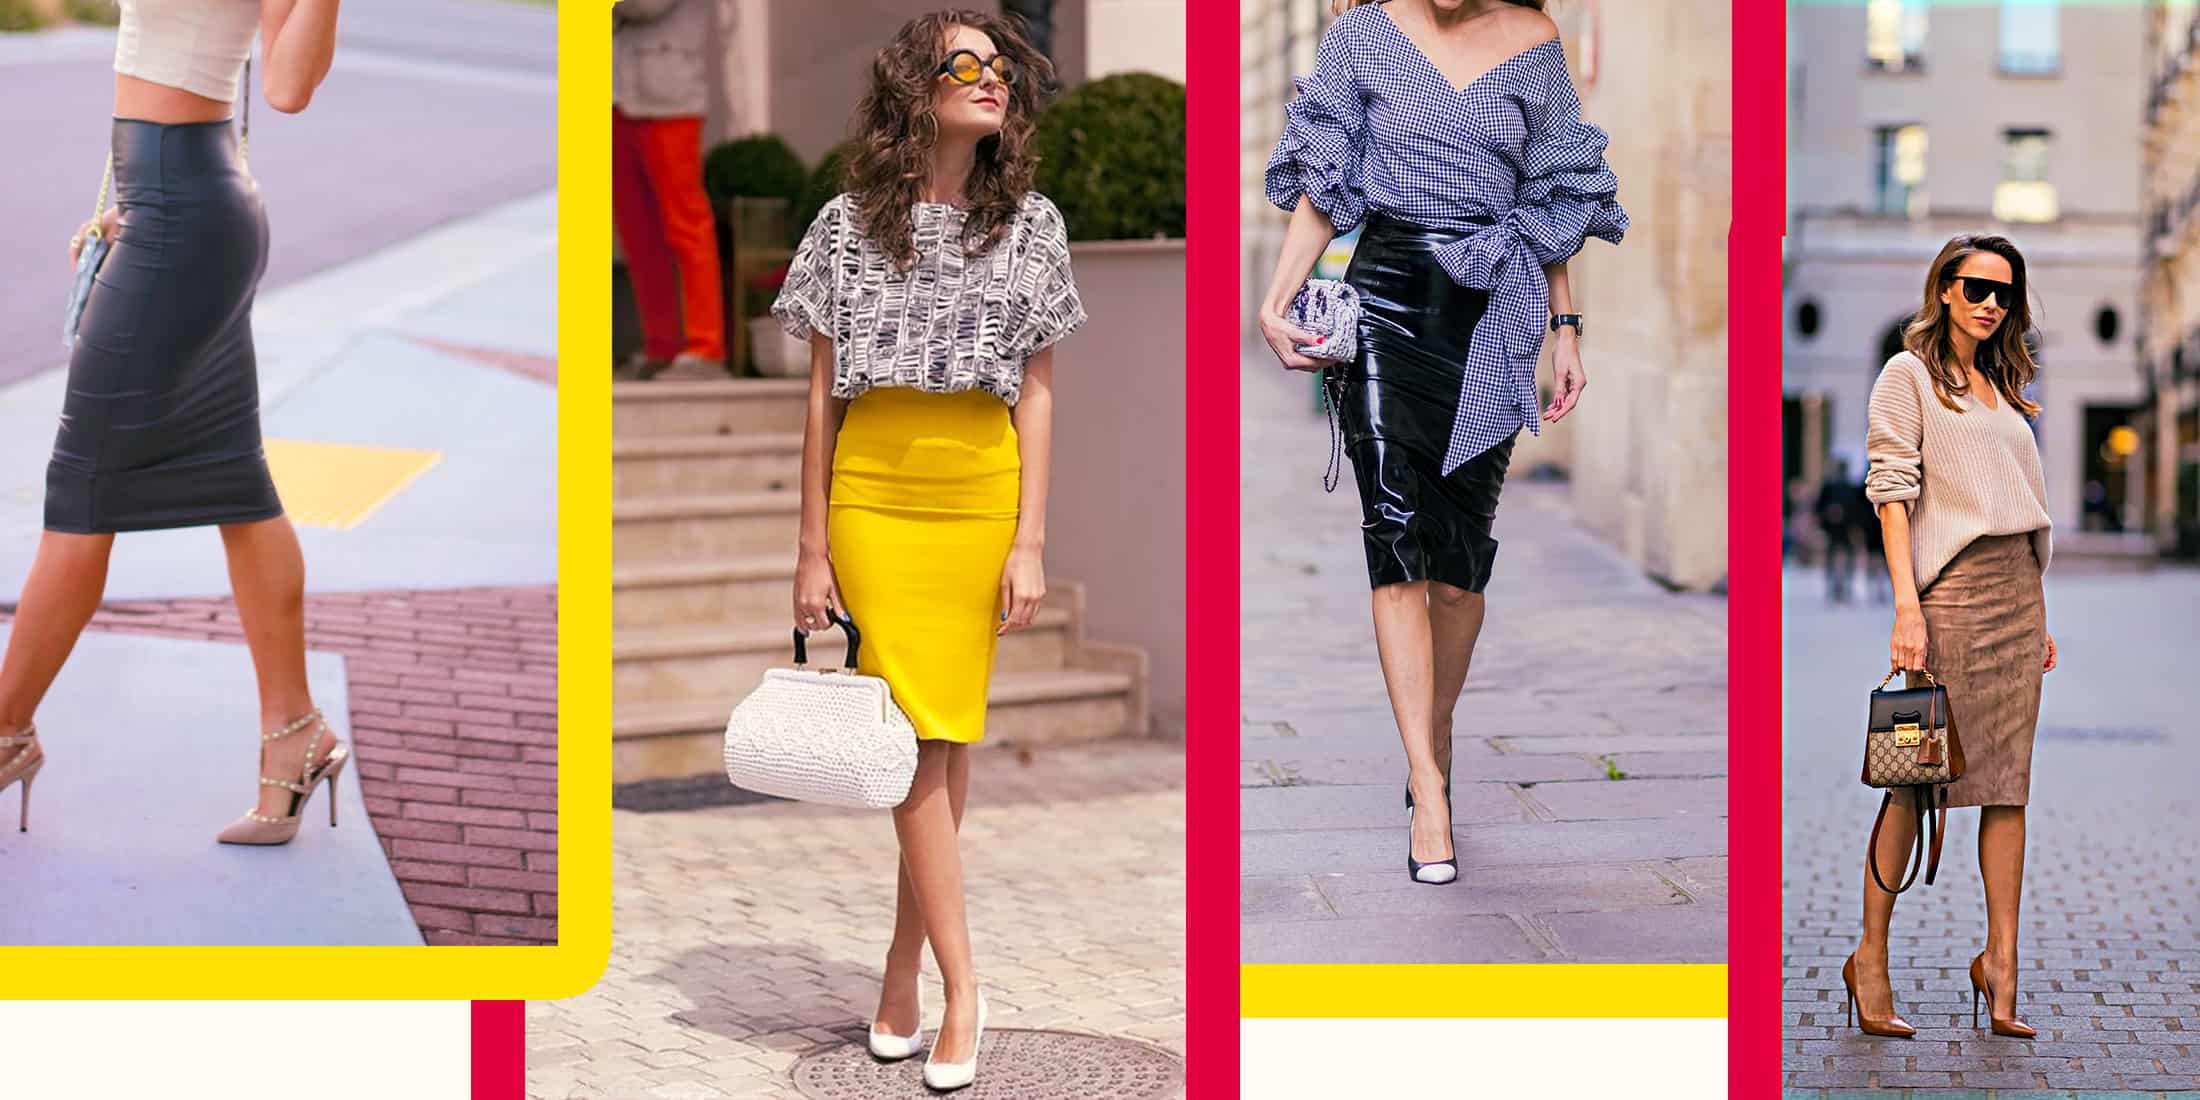 How to Pull off Pencil Skirt Outfits Like a Style Icon  Fashion Classy  work outfits Pencil skirt casual